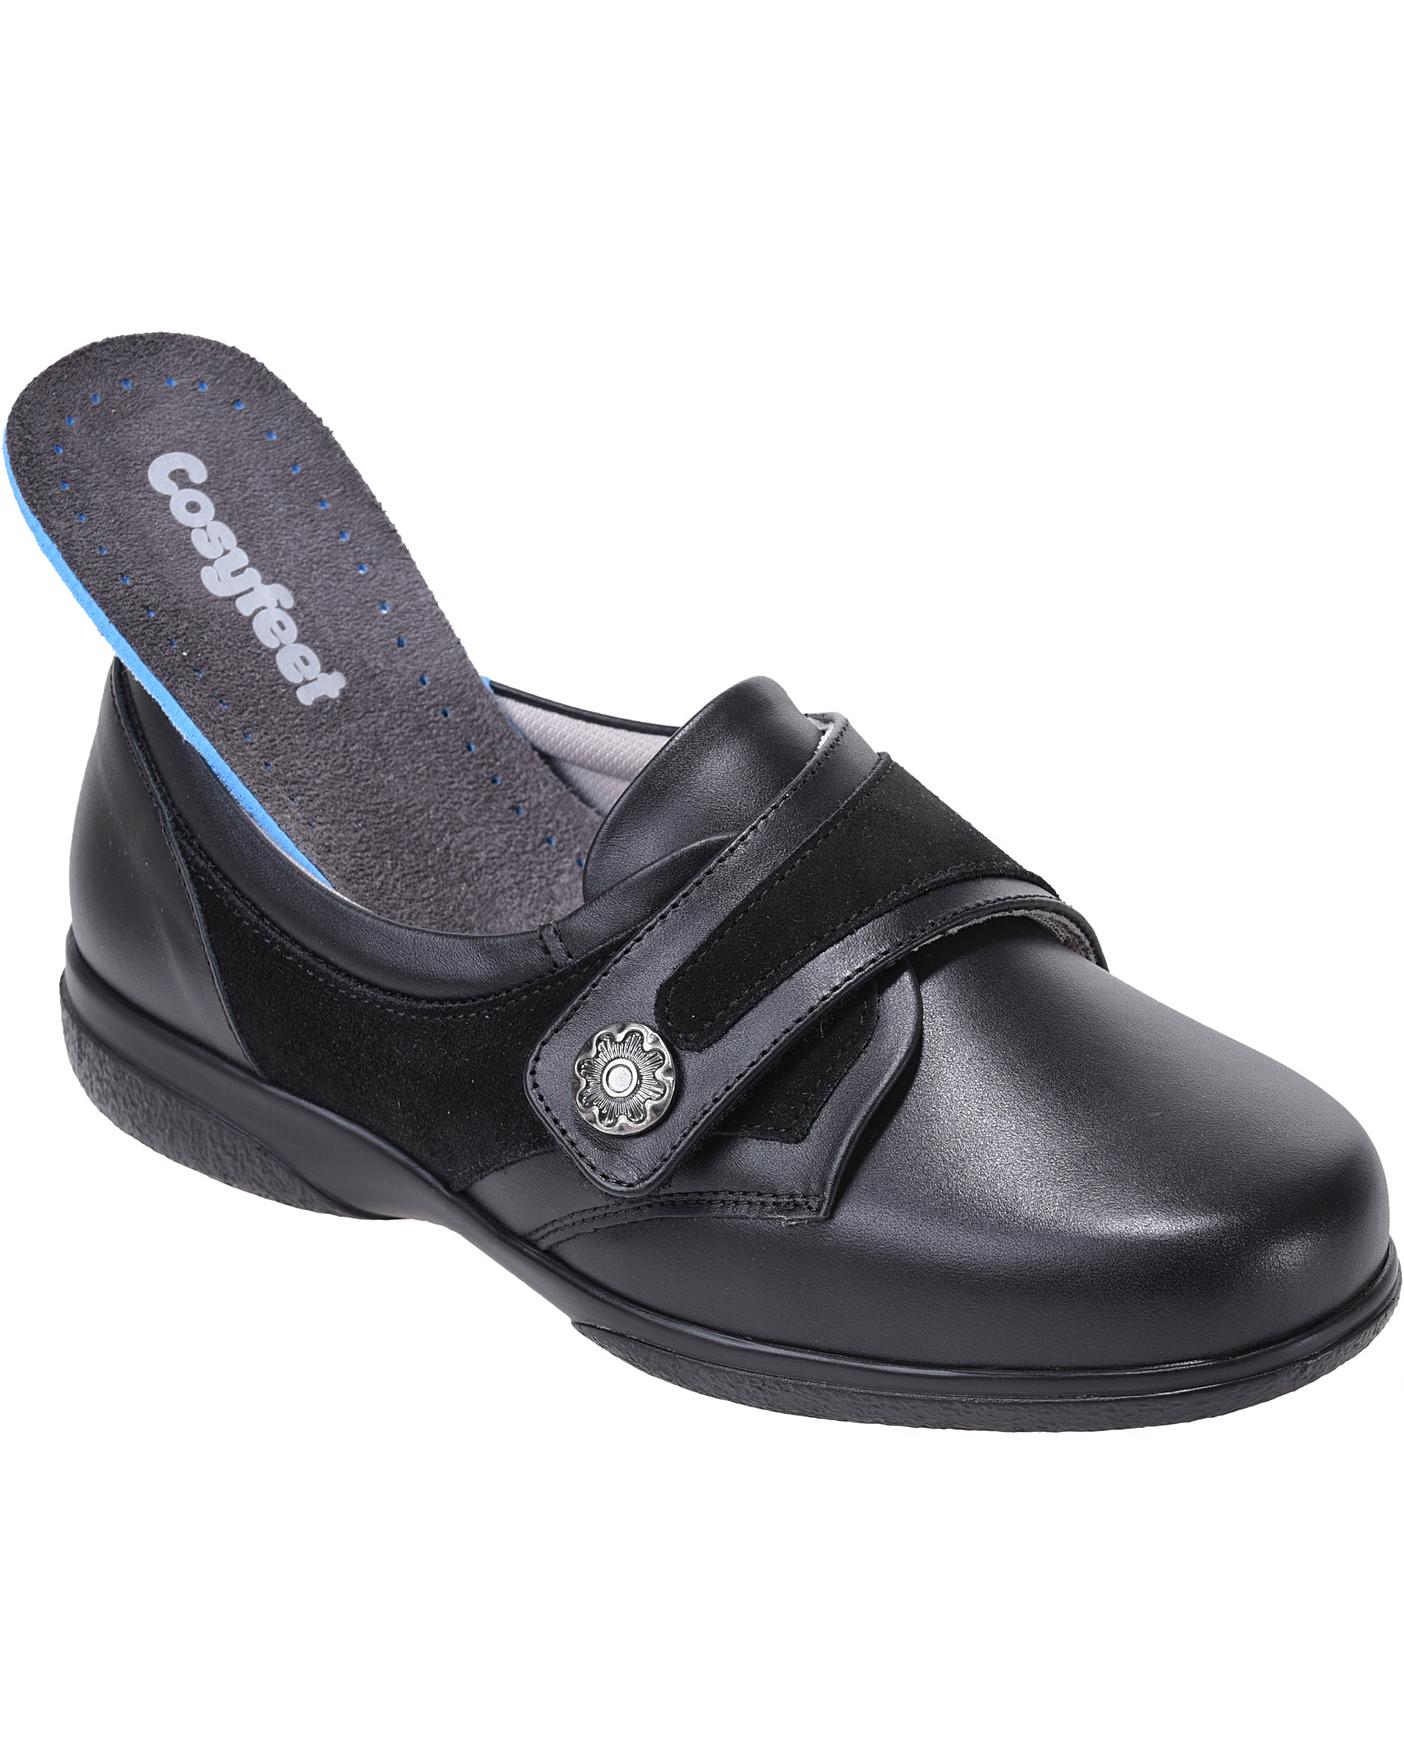 cosyfeet womens shoes